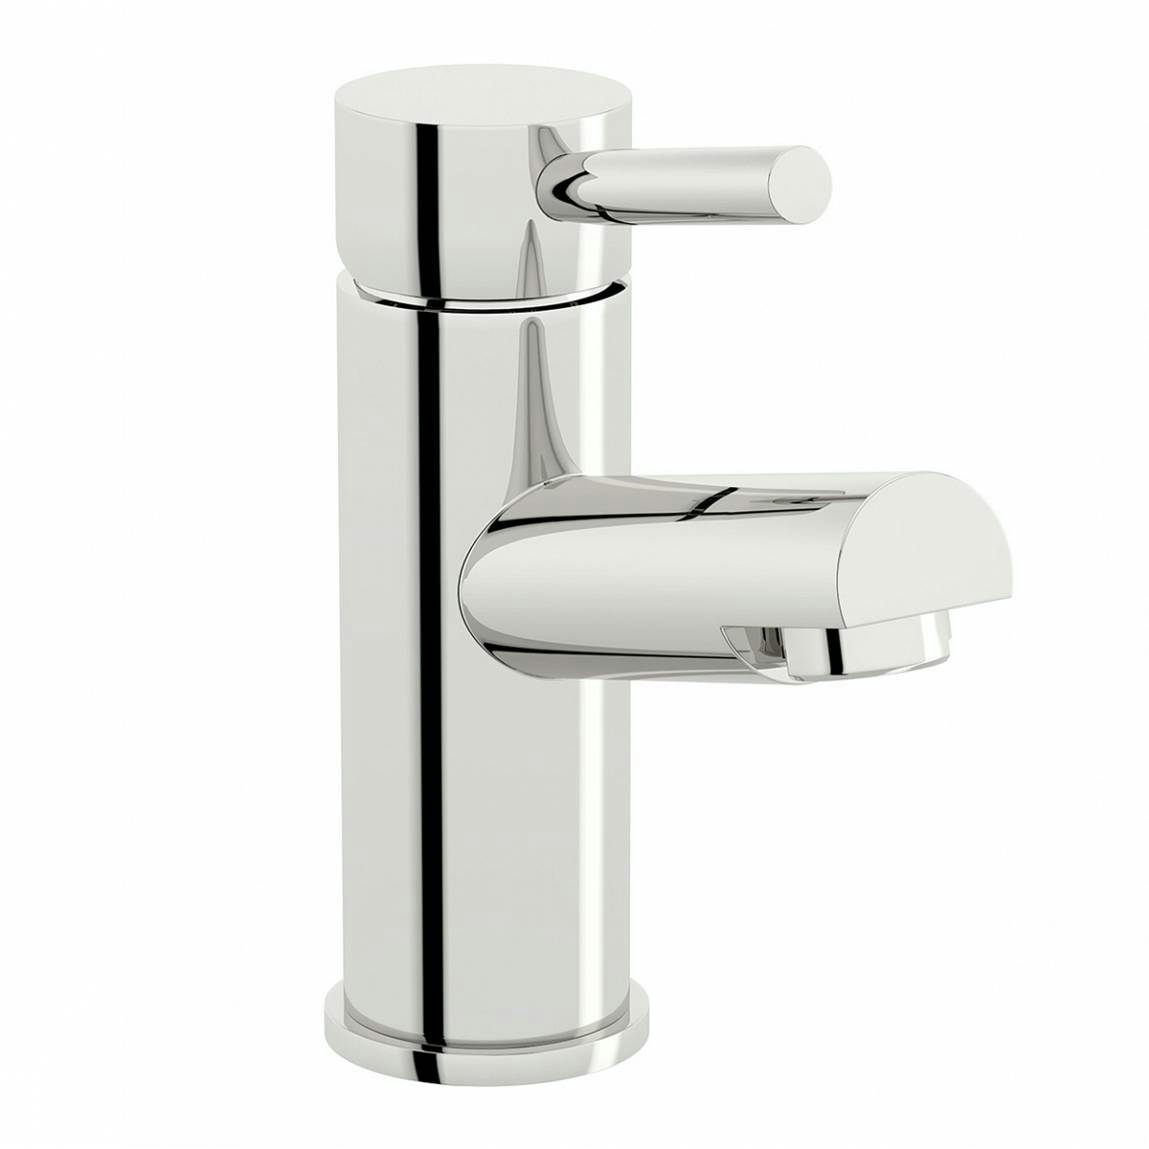 Orchard Eden basin mixer tap with unslotted waste